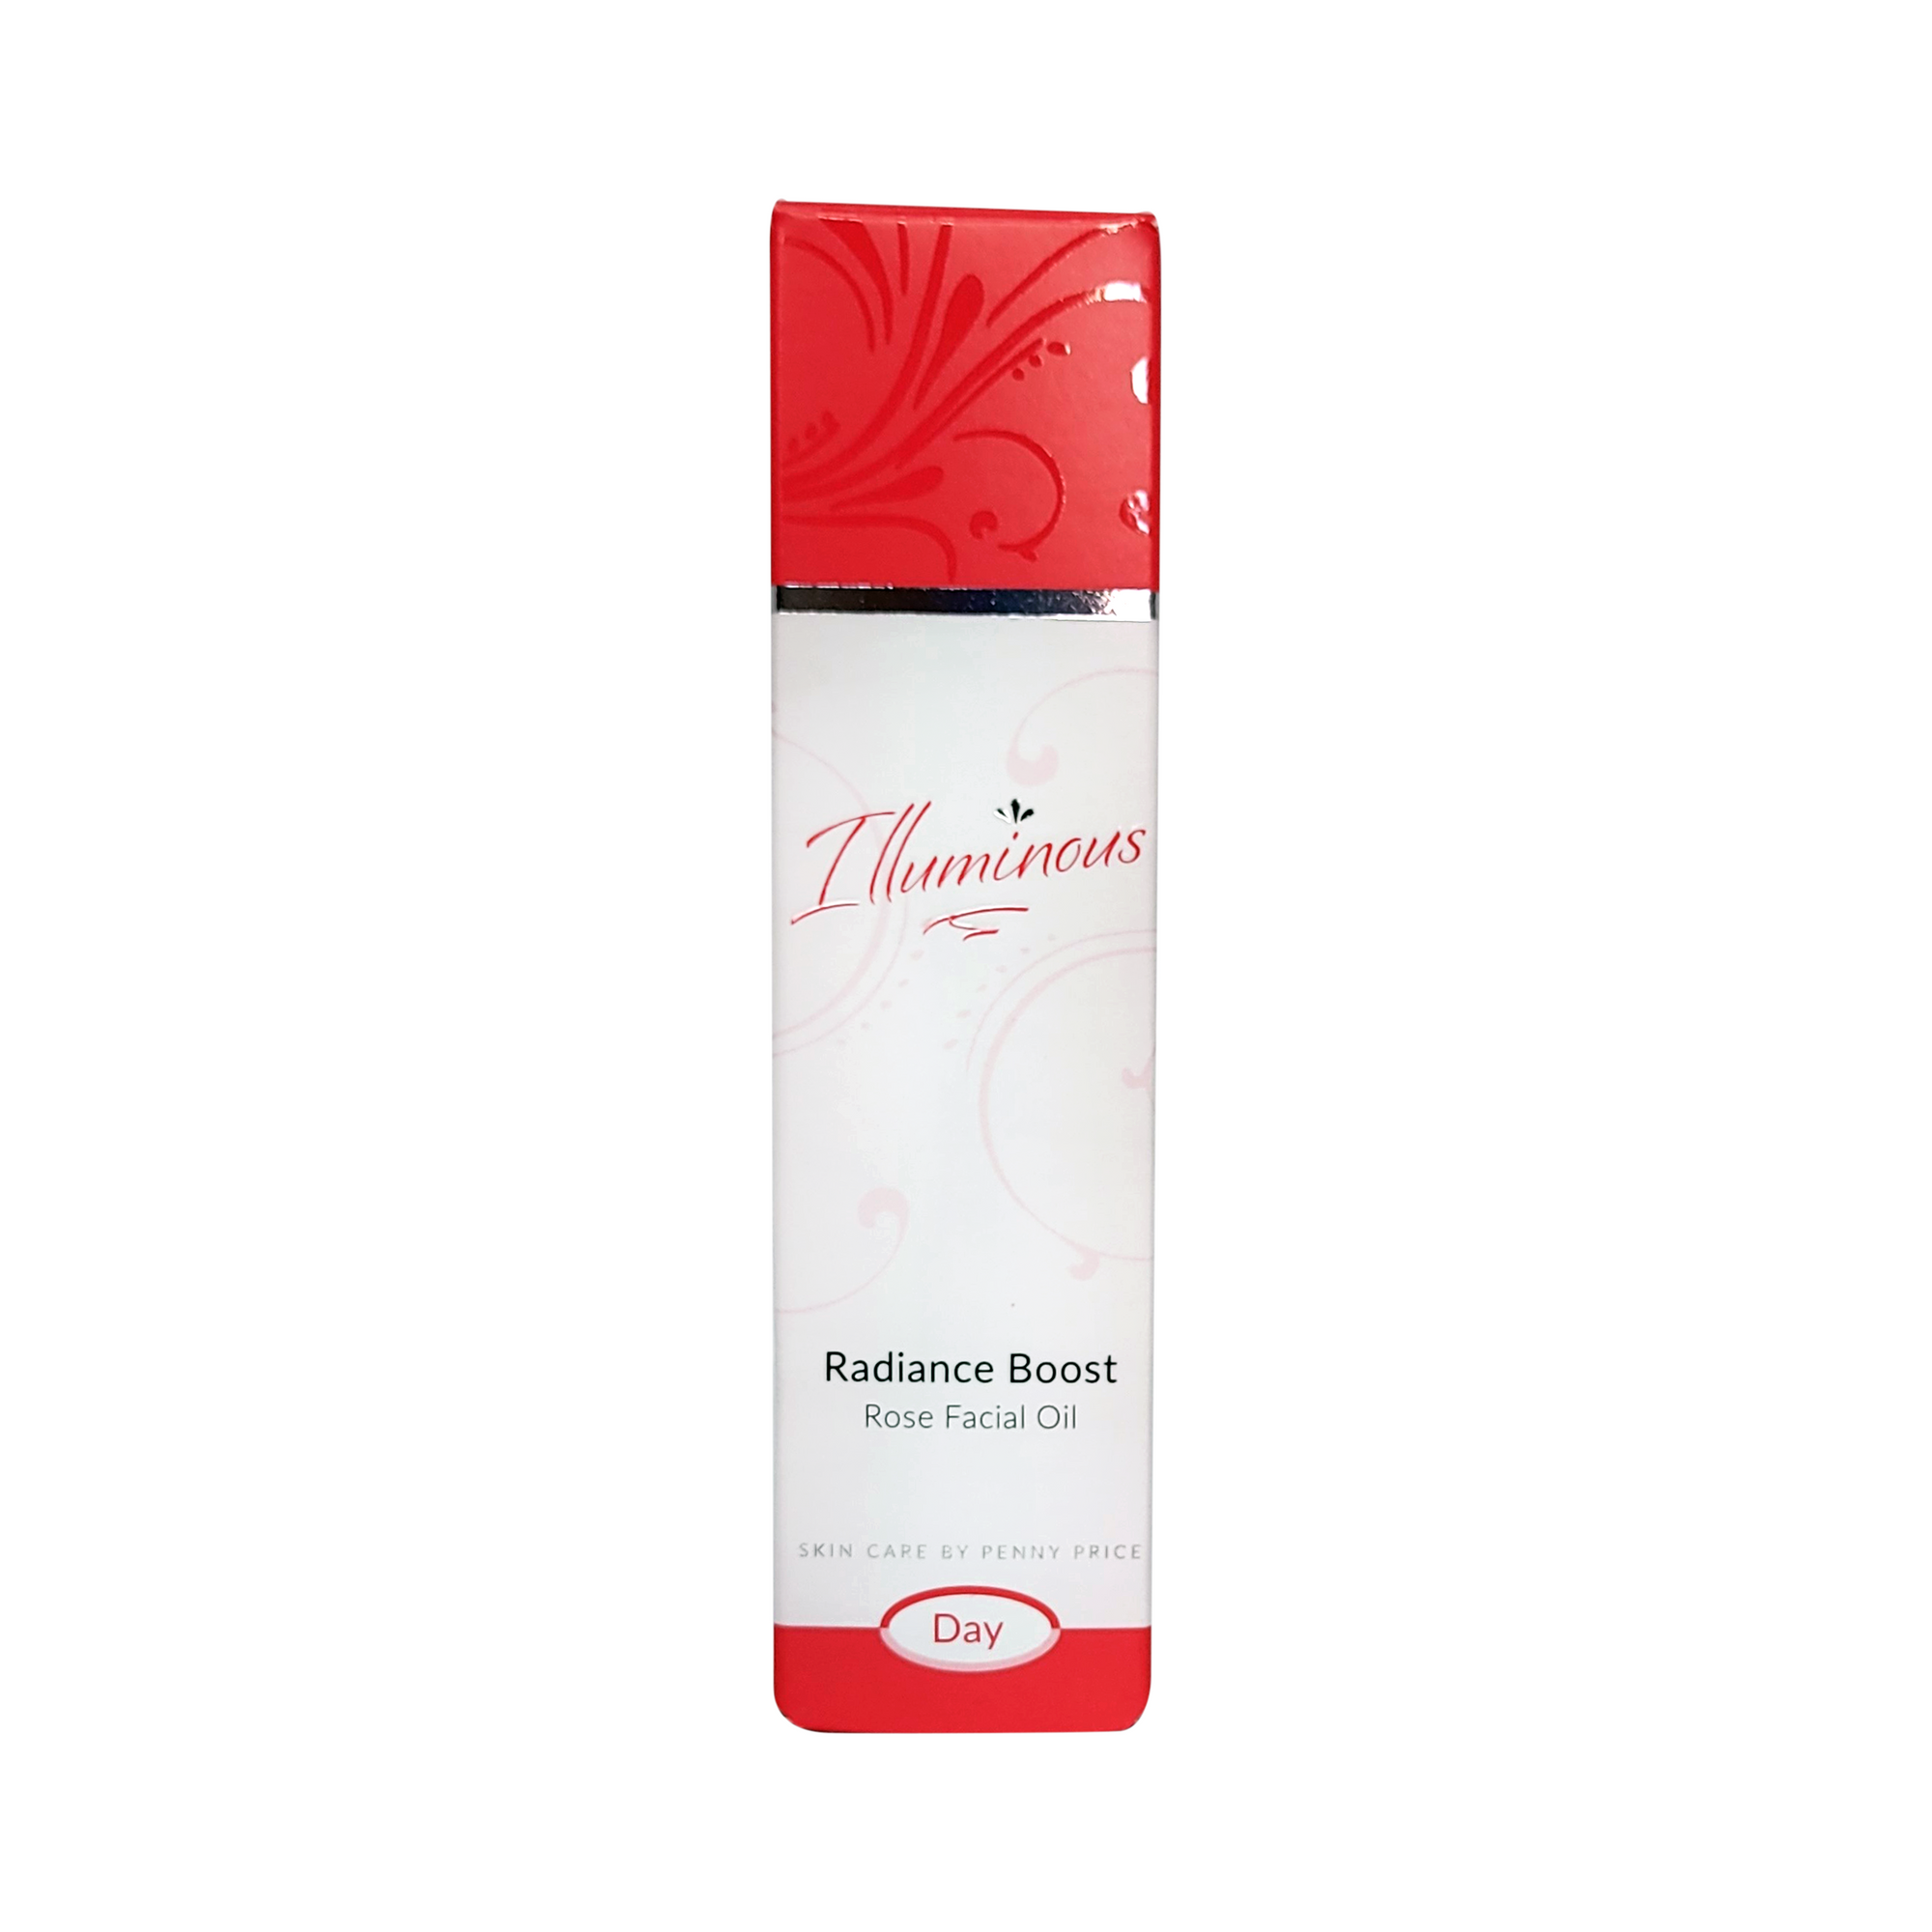 Radiance Boost Rose Facial Oil